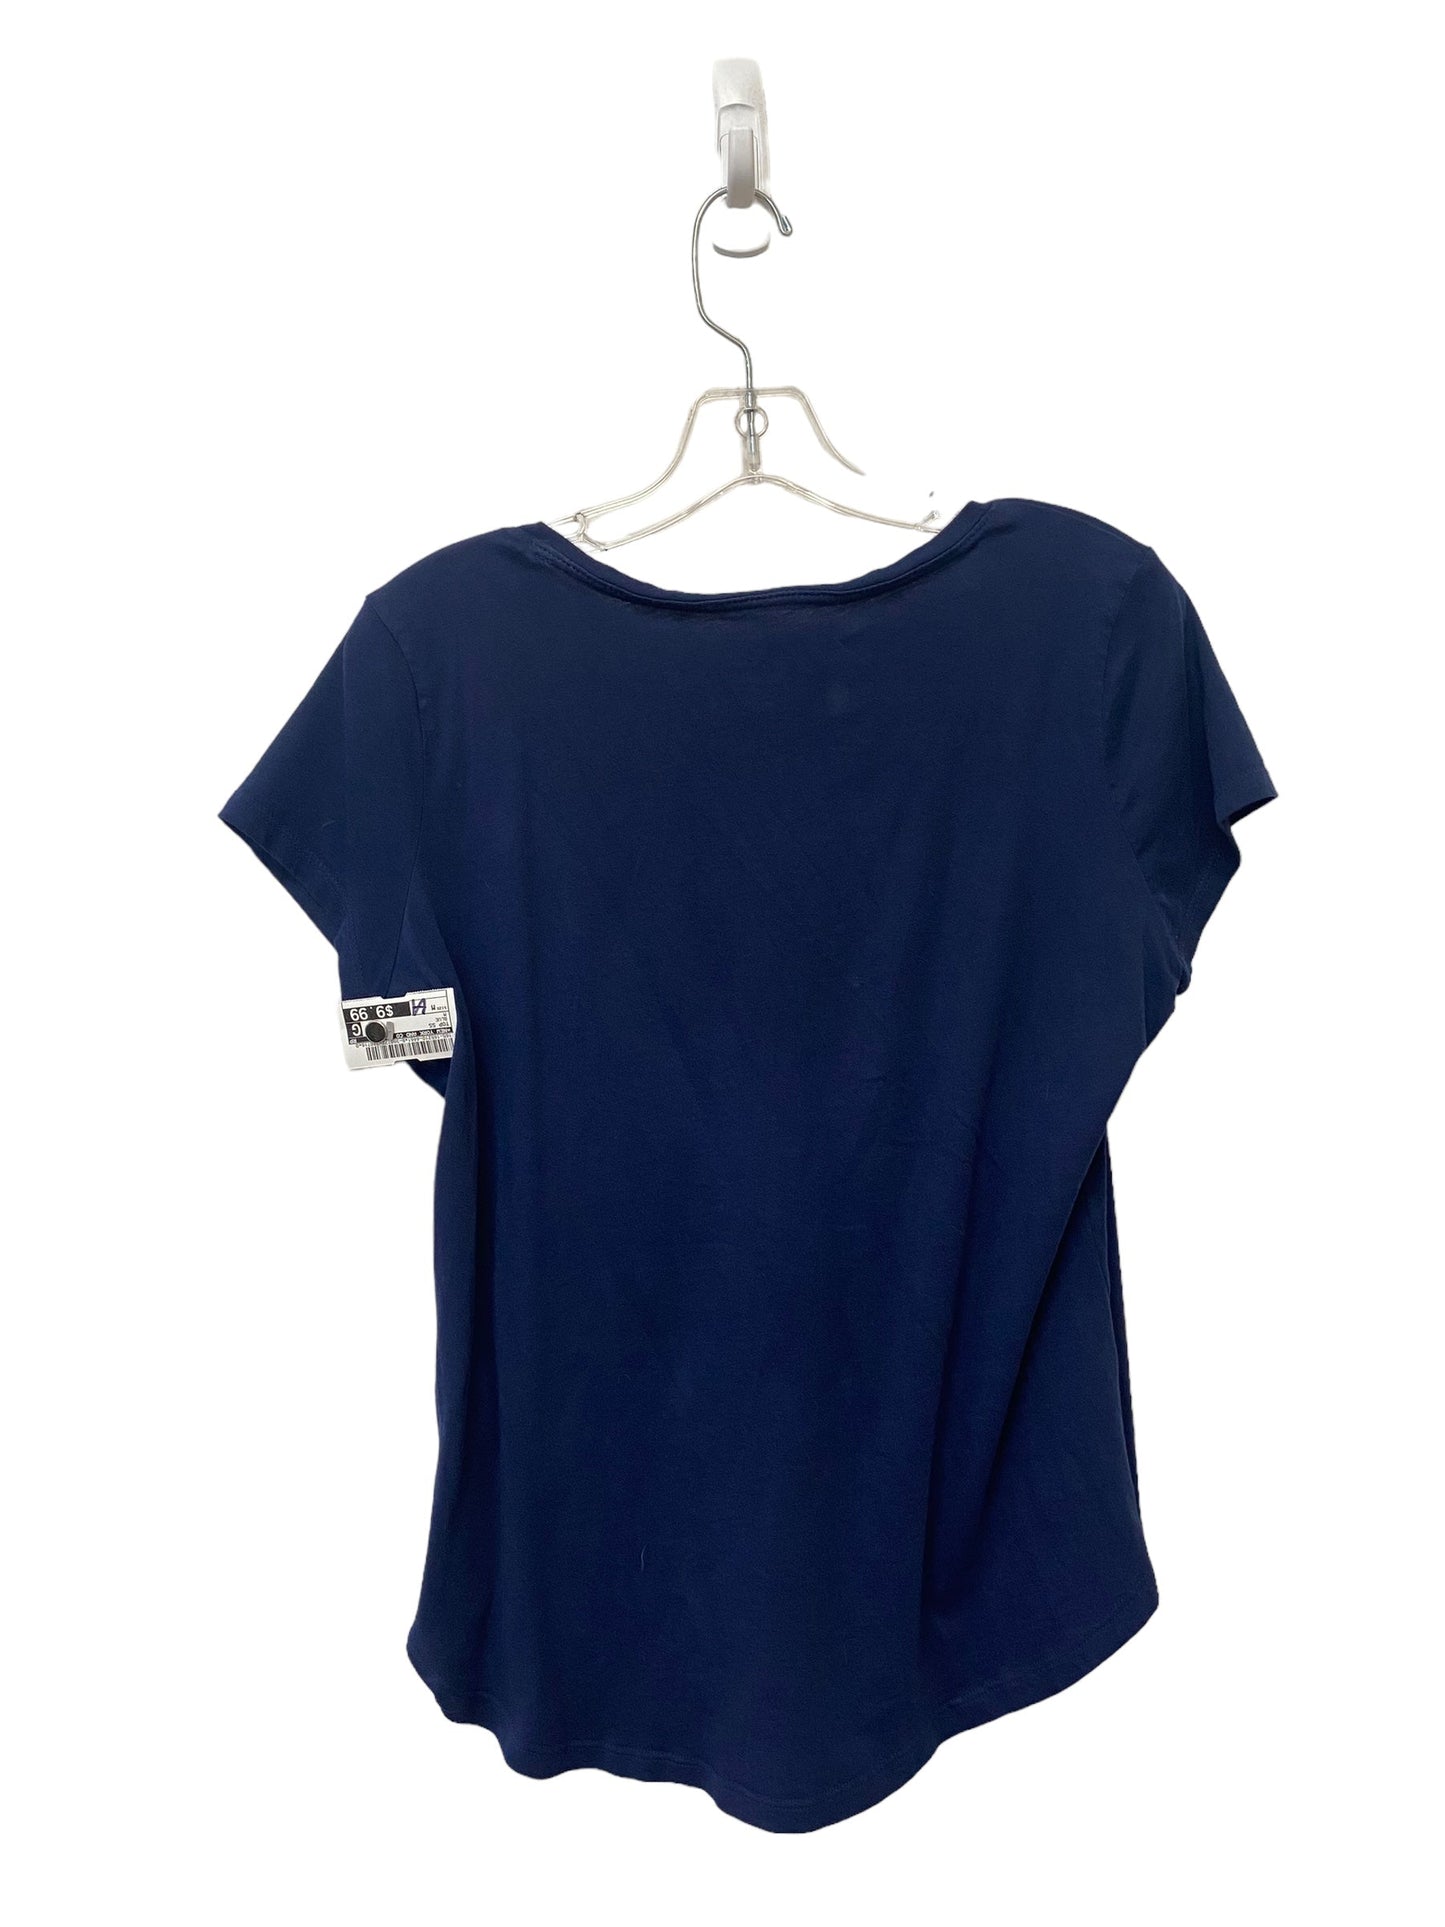 Blue Top Short Sleeve New York And Co, Size M